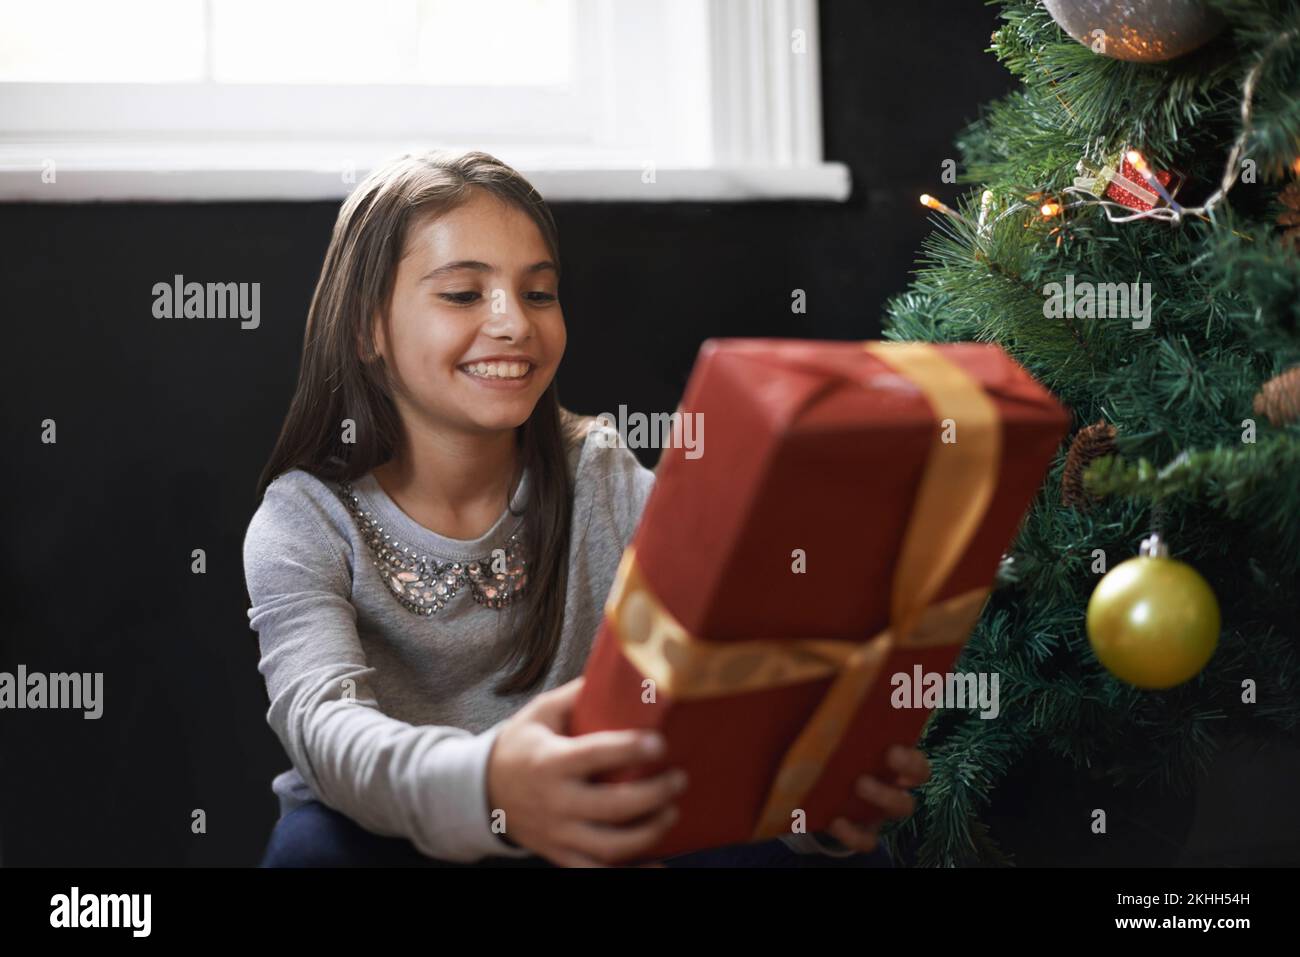 Excited about opening this present. a little girl holding a christmas present. Stock Photo